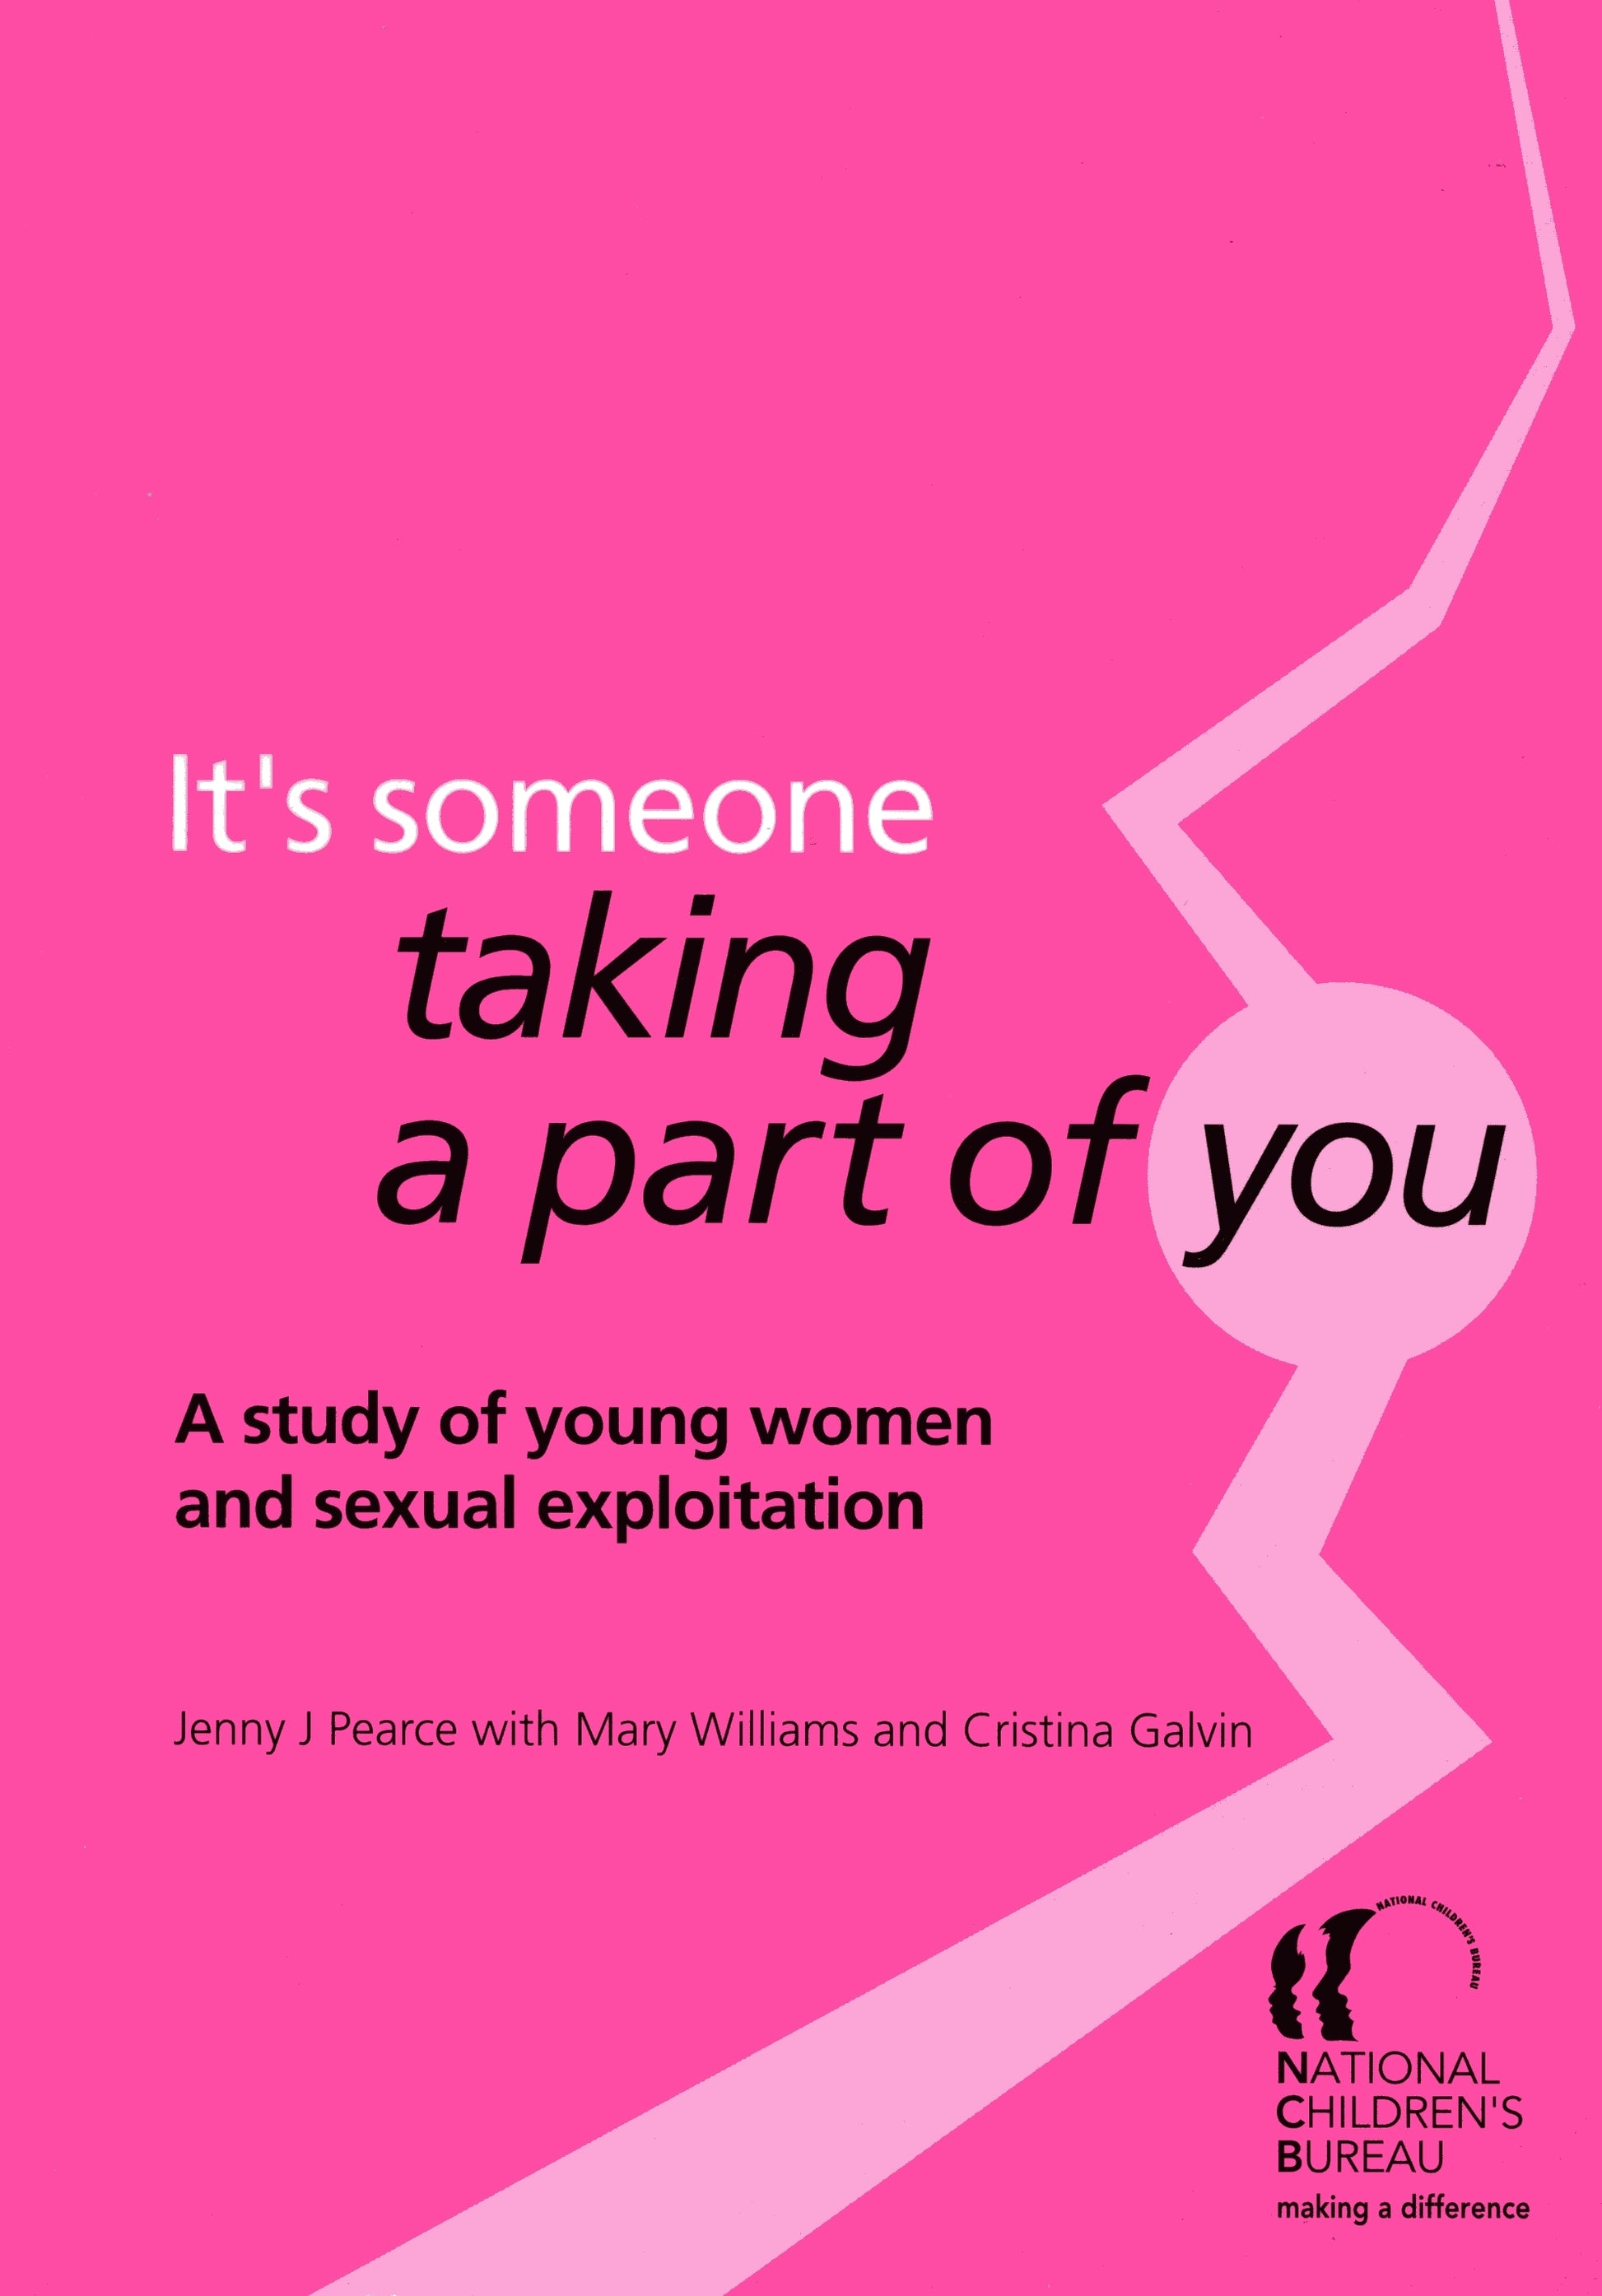 It's someone taking a part of you by Cristina Galvin, Jenny J Pearce, Mary Williams